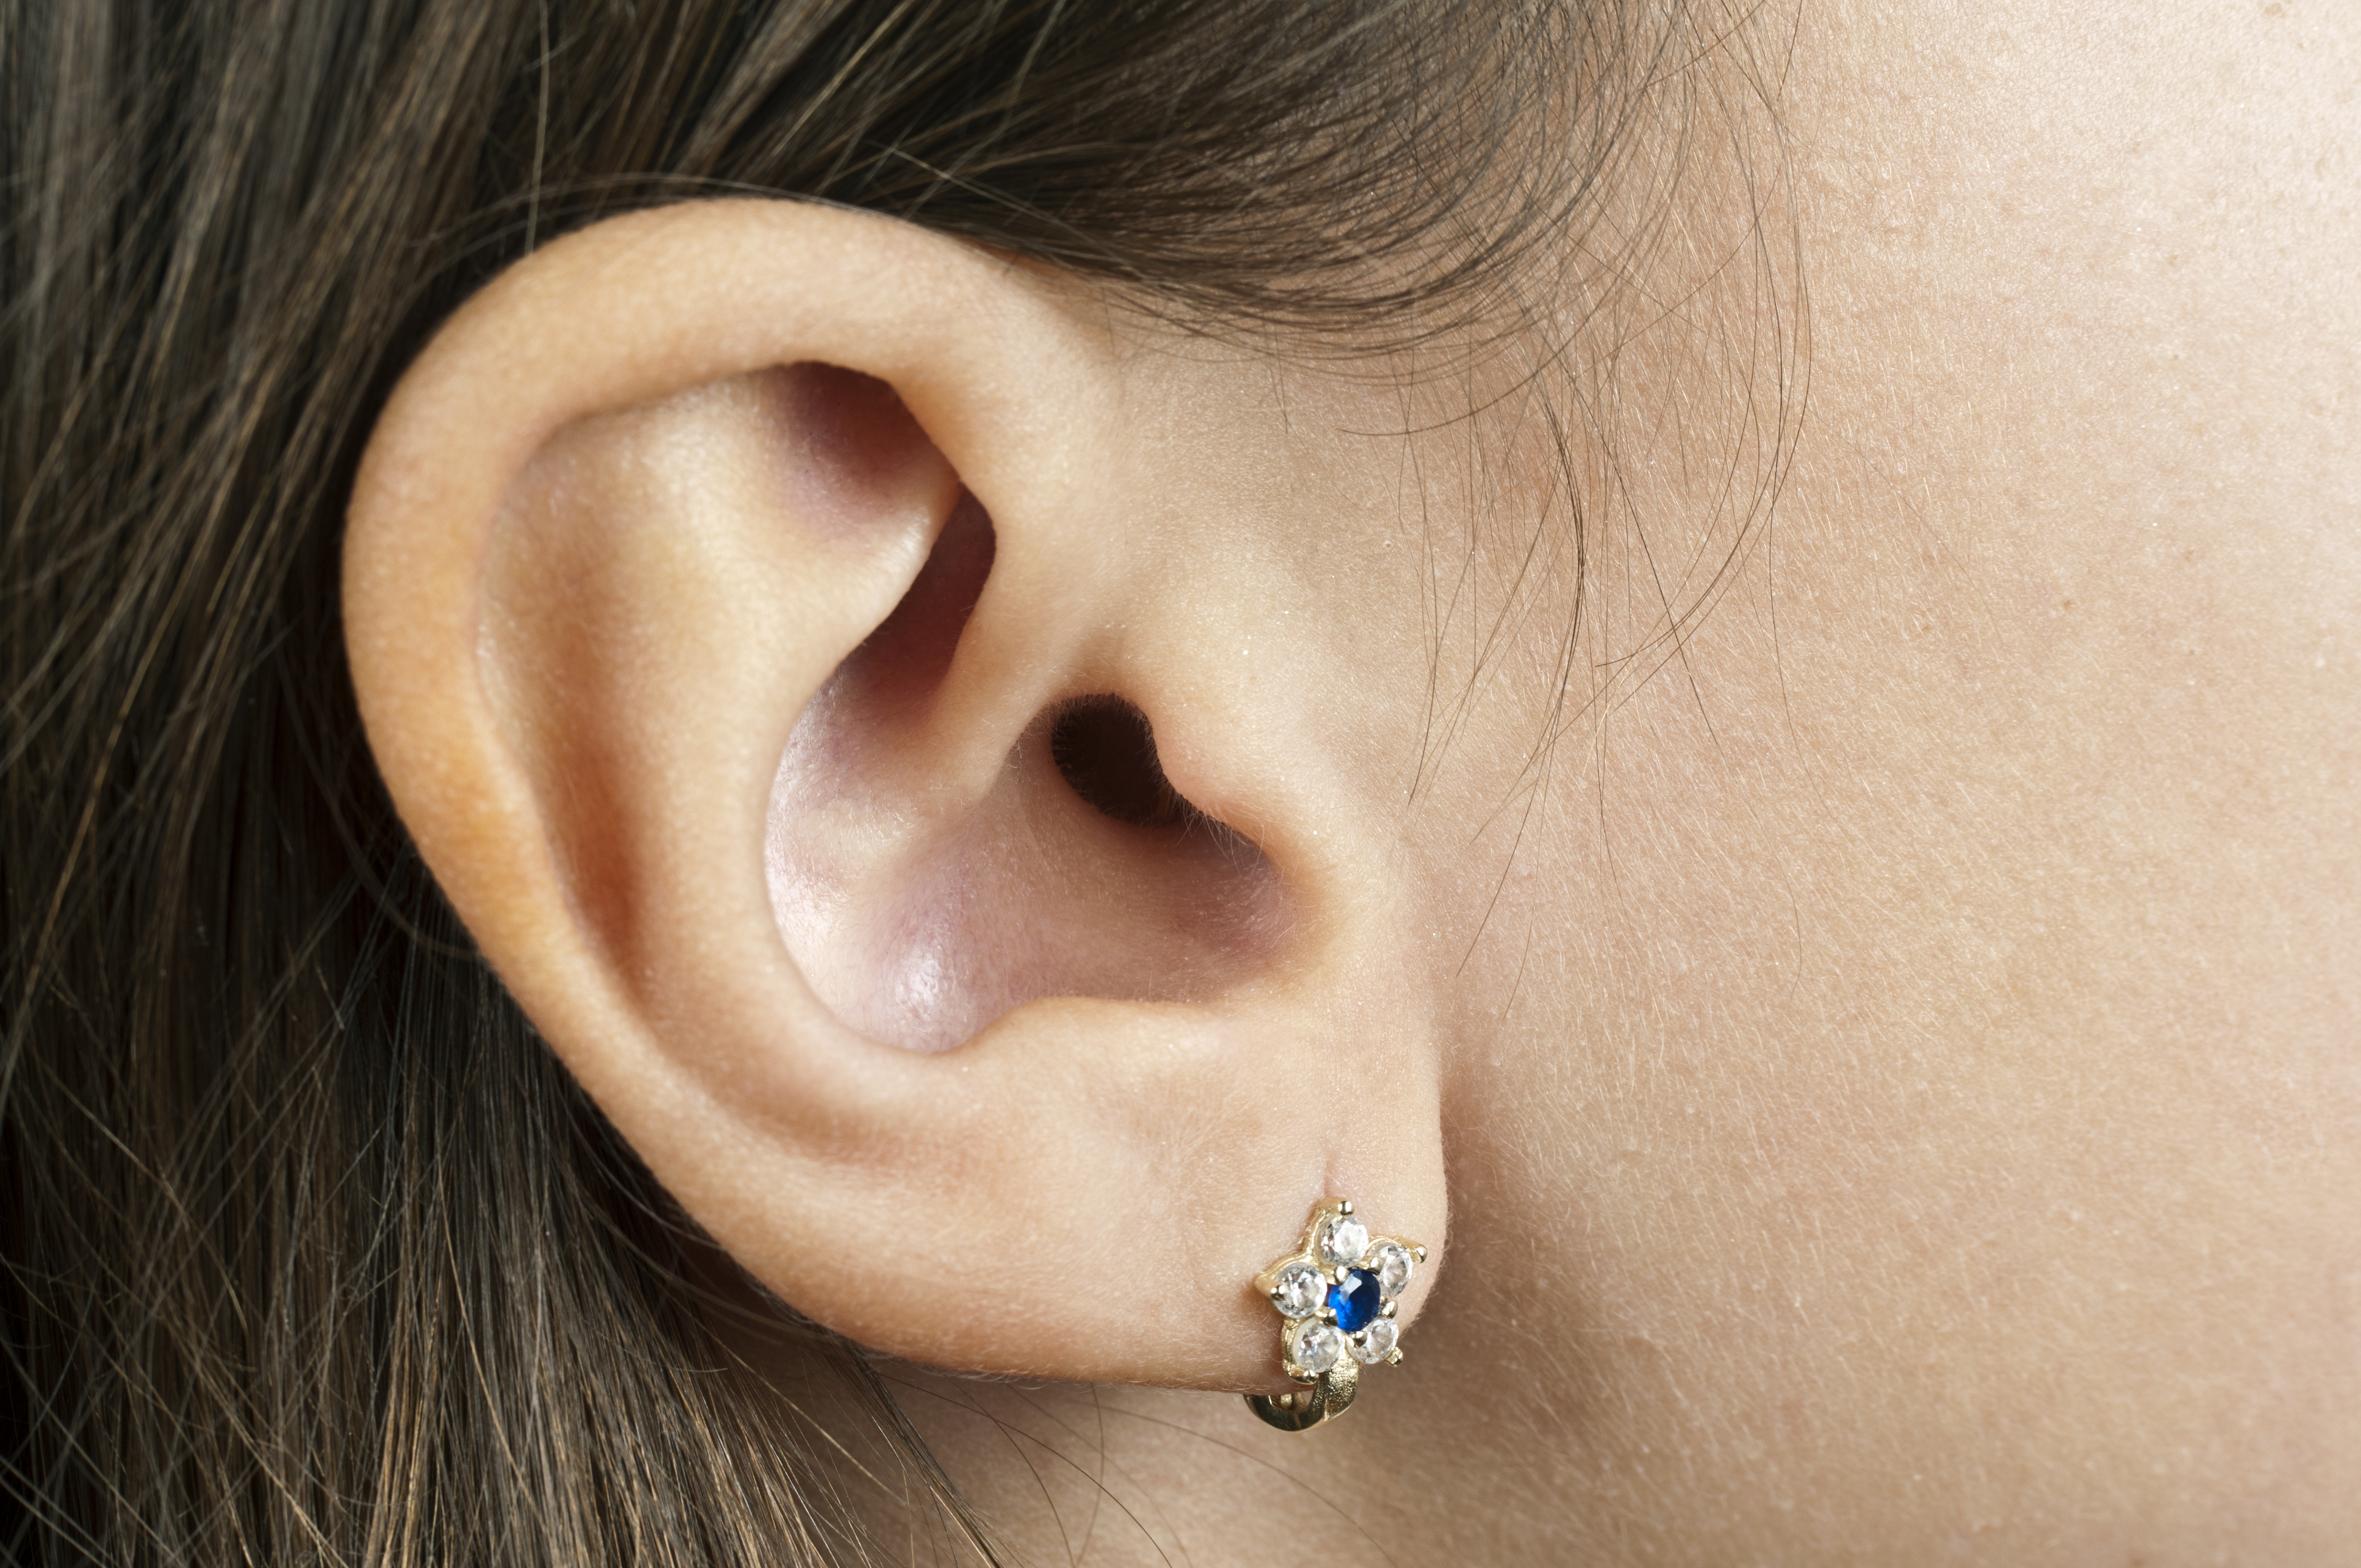 Oreille humaine | Source : Getty Images